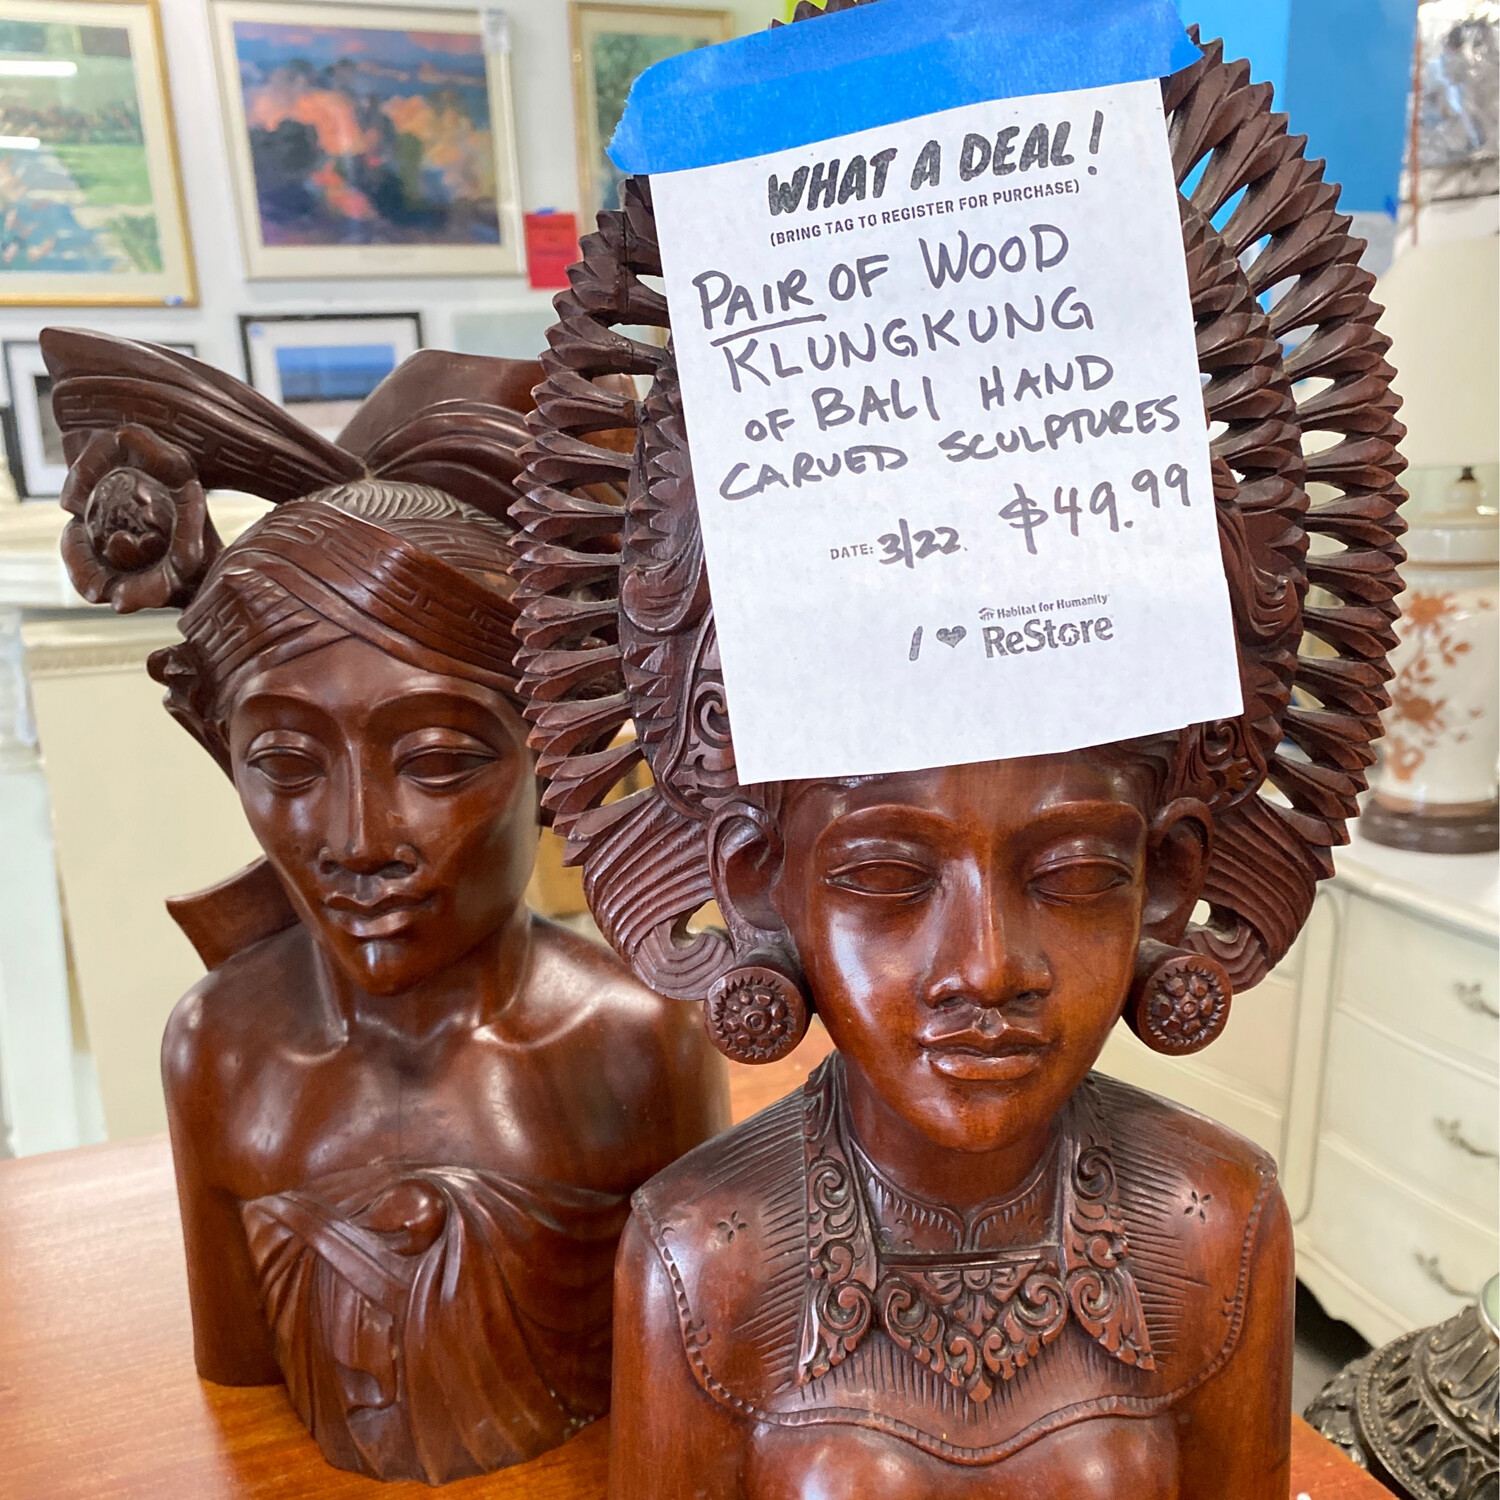 Pair Of Wood Klungkung Of Bali Hand Carved Scuptures